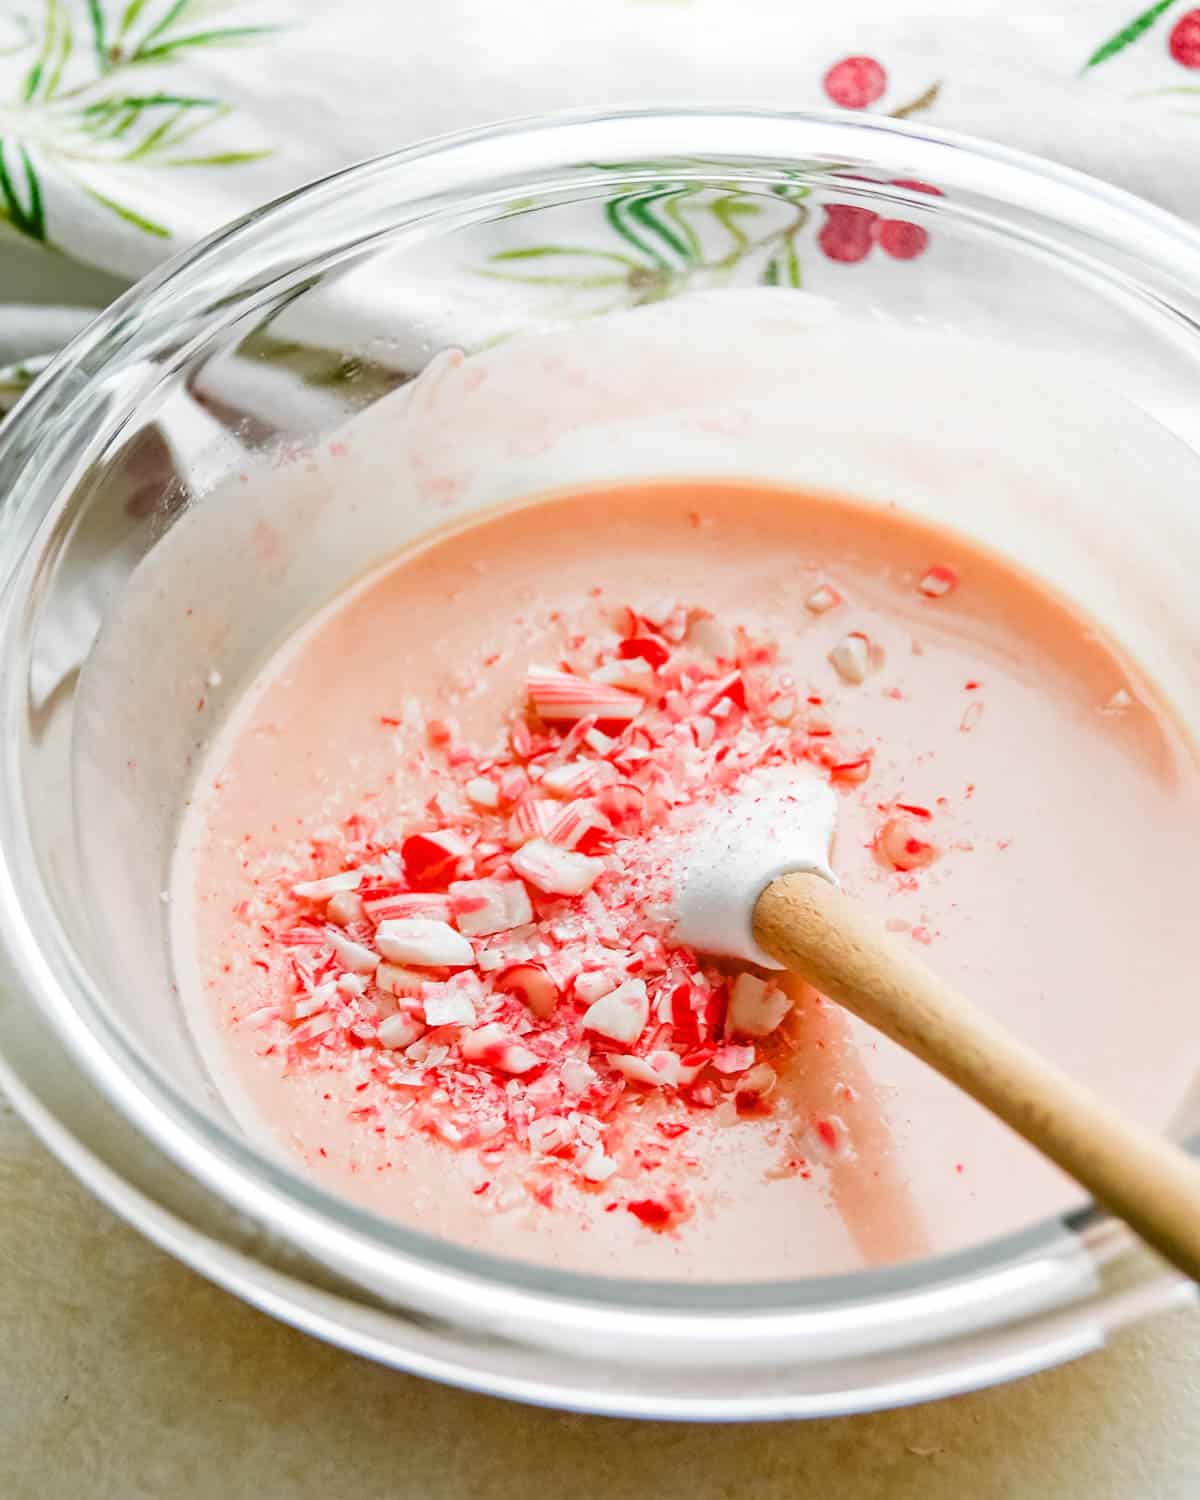 Stirring up crushed candy canes into the white chocolate.